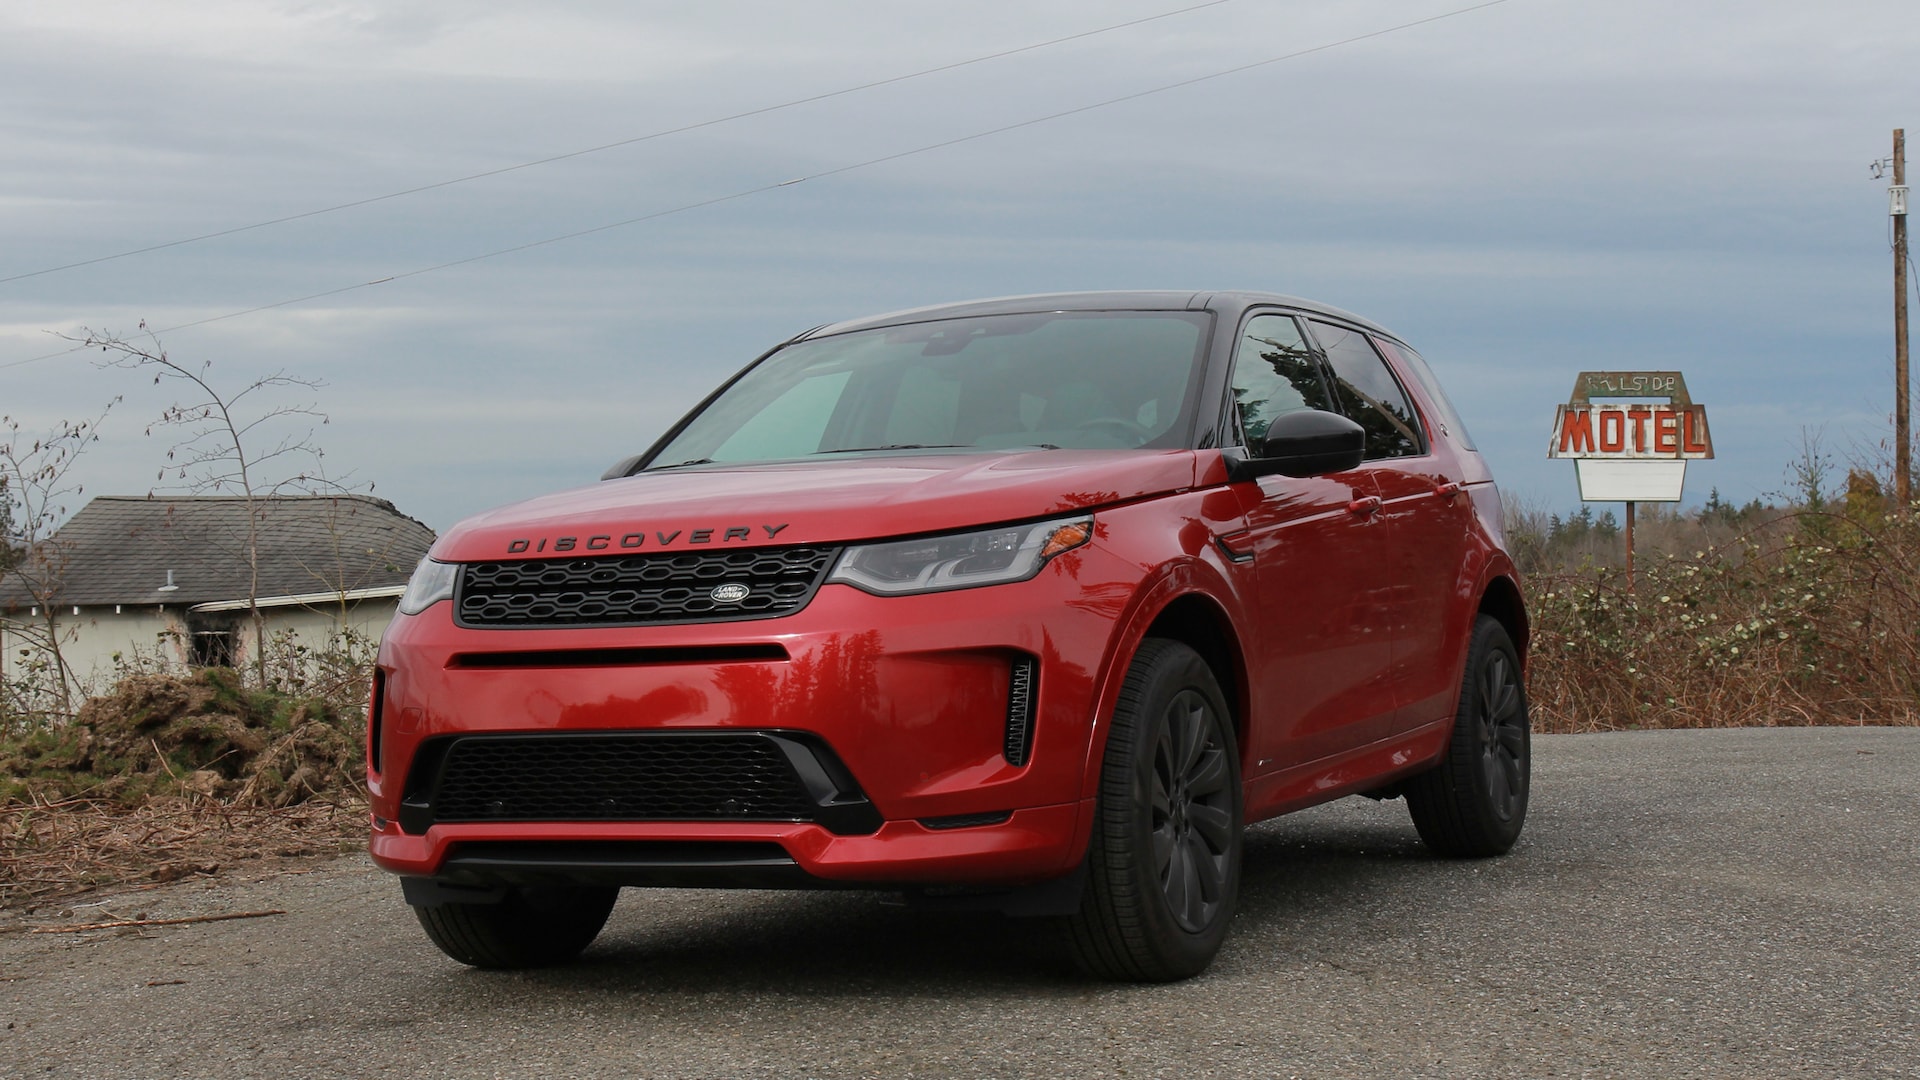 One Week With: 2020 Land Rover Discovery Sport Review